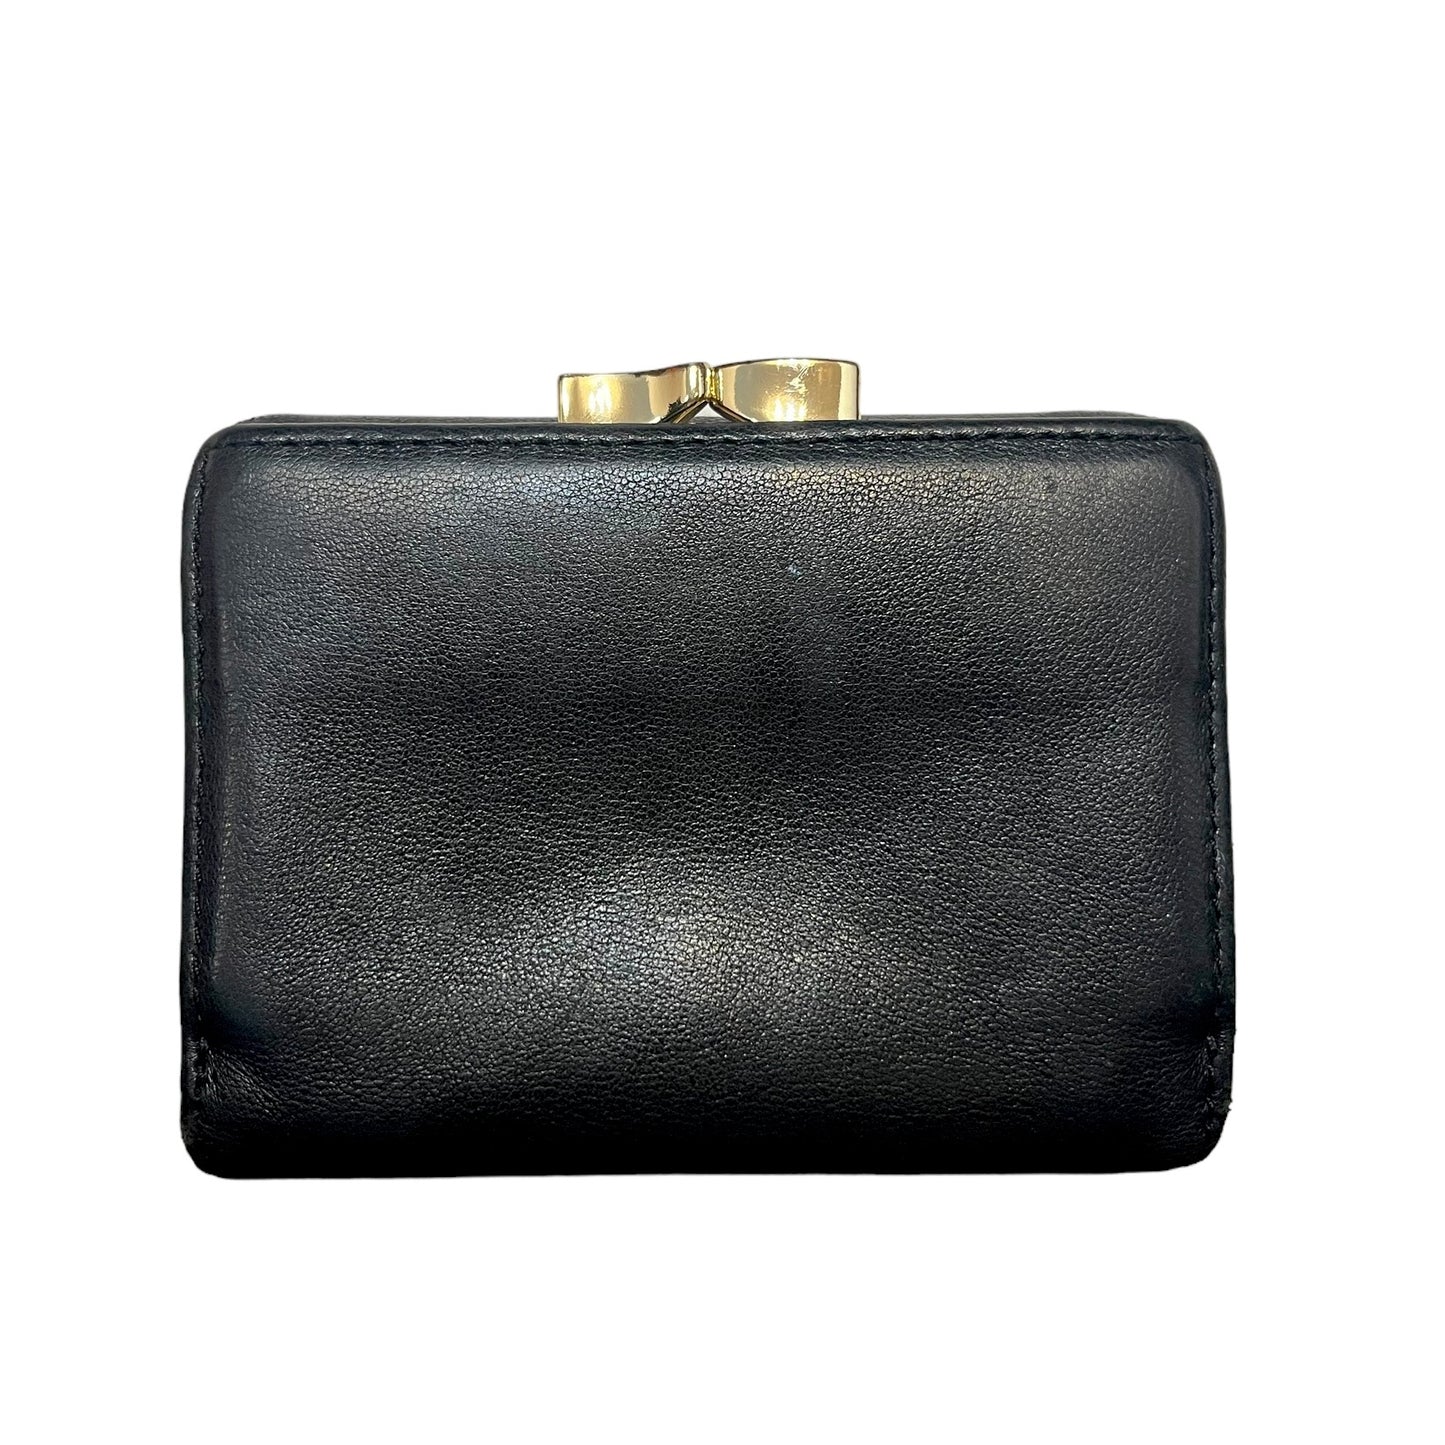 Vivienne Westwood "Nappa Small Frame Wallet"